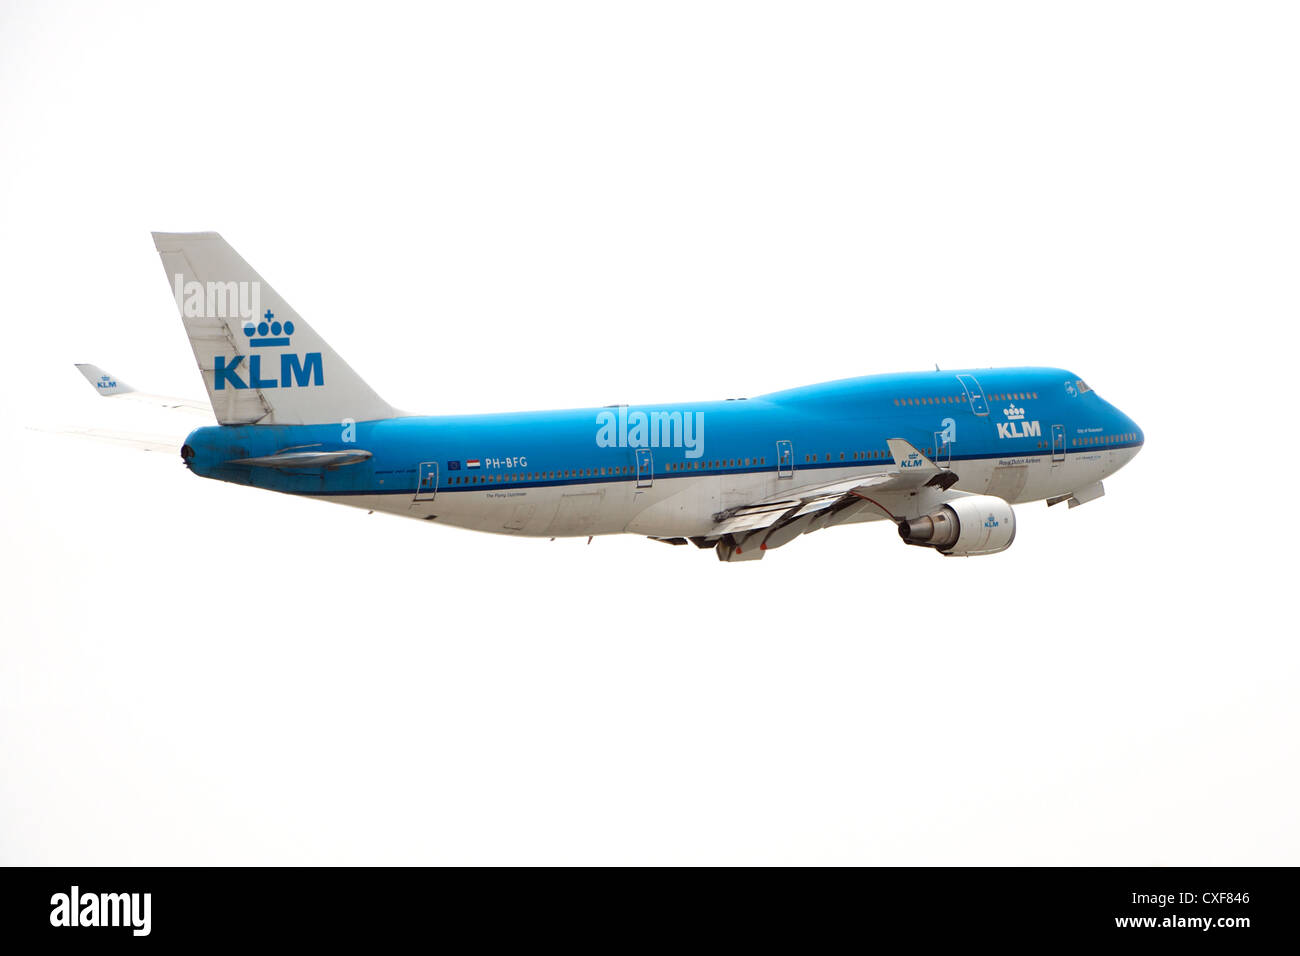 KLM - The Flying Dutchman - Boeing 747-400 shortly after takeoff from Sint Maarten. Stock Photo